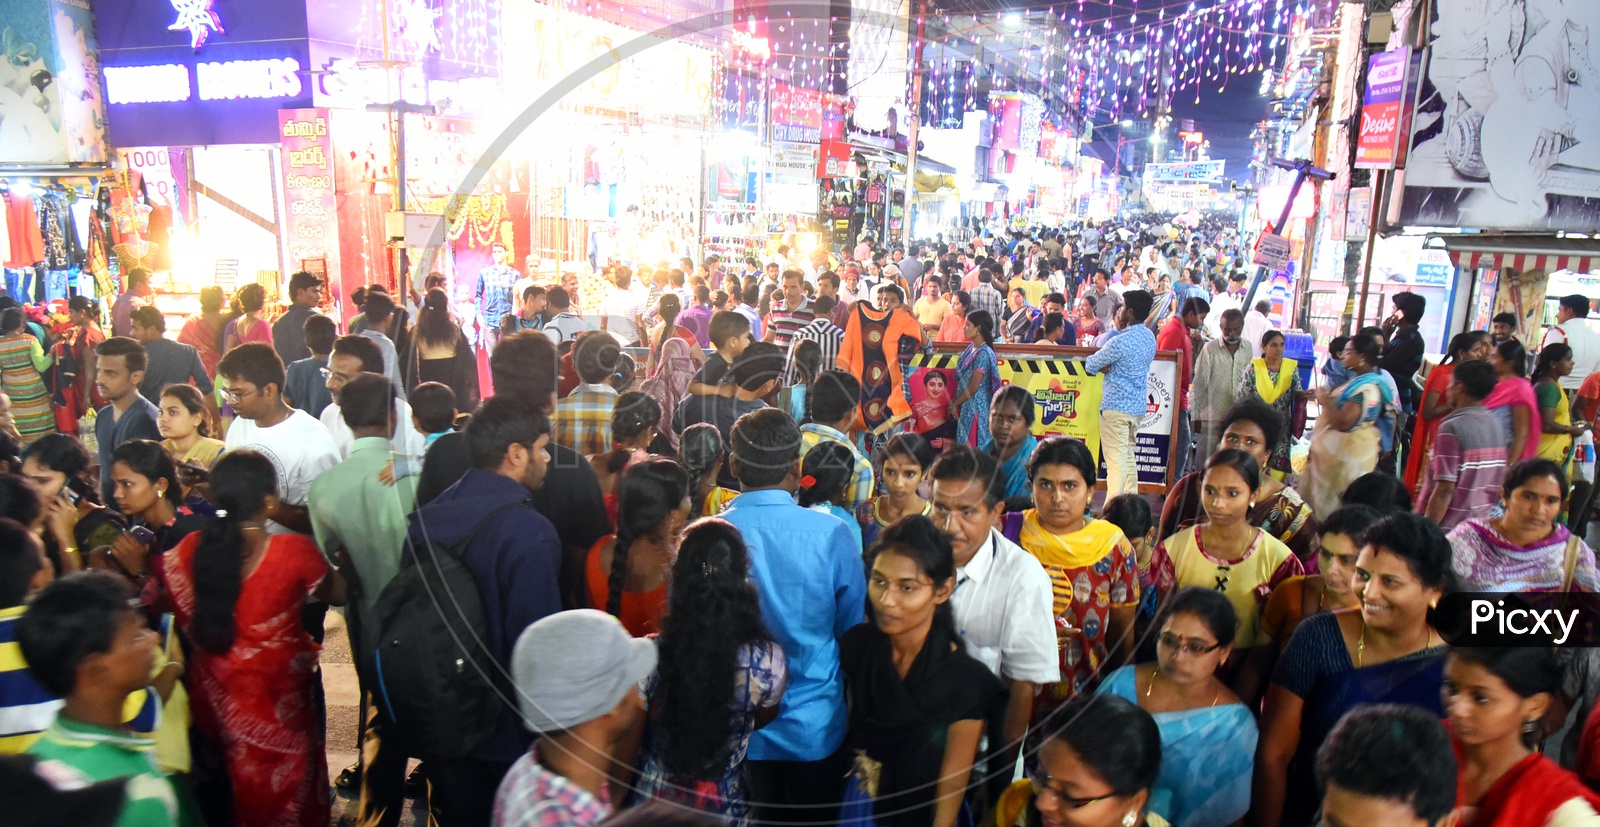 Crowd in a bazaar during the night